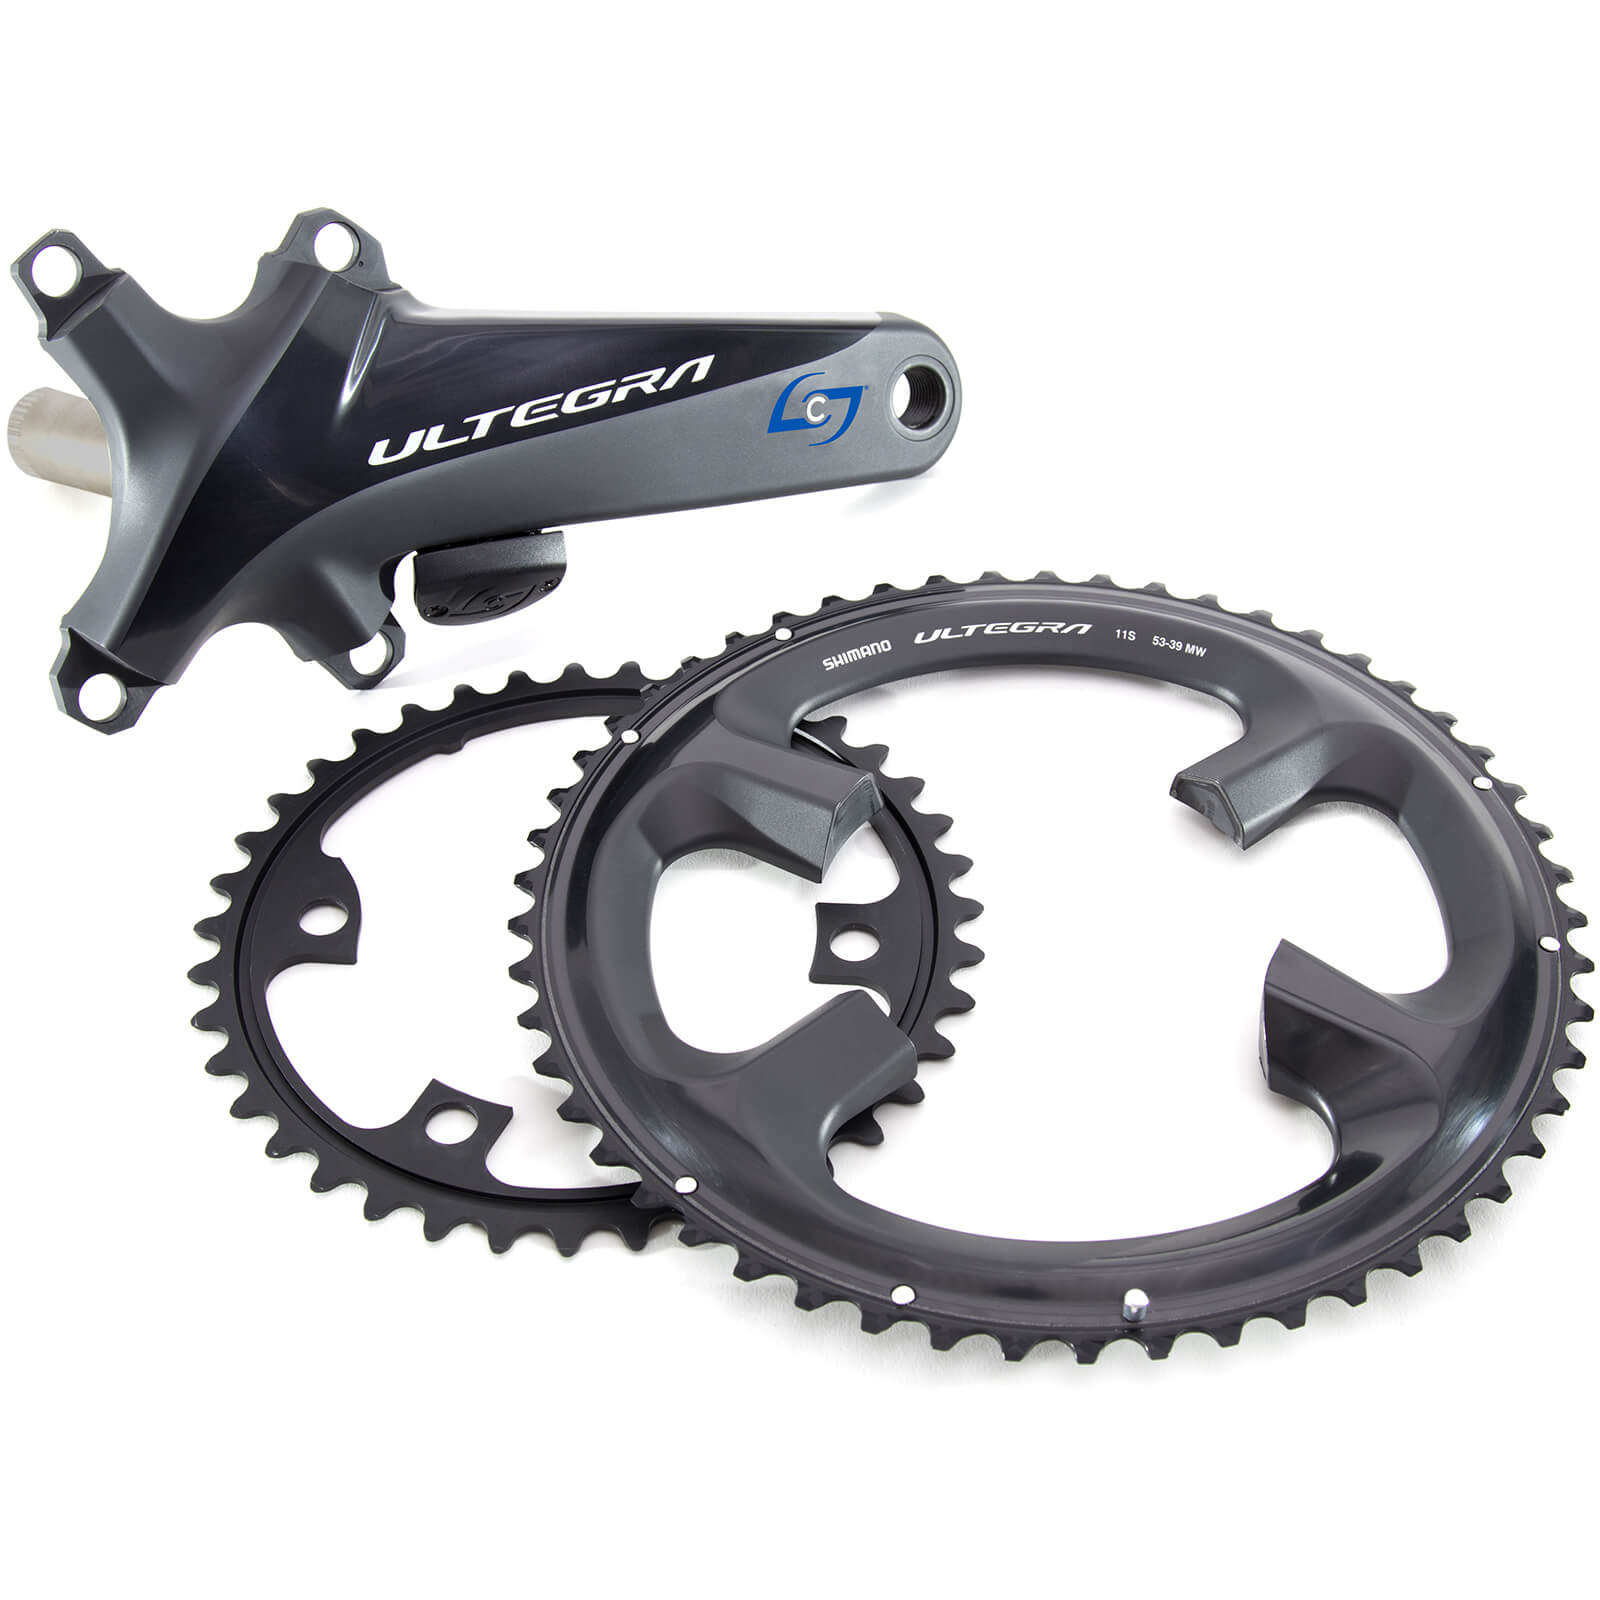 Stages R G3 Ultegra R8000 Power Meter 